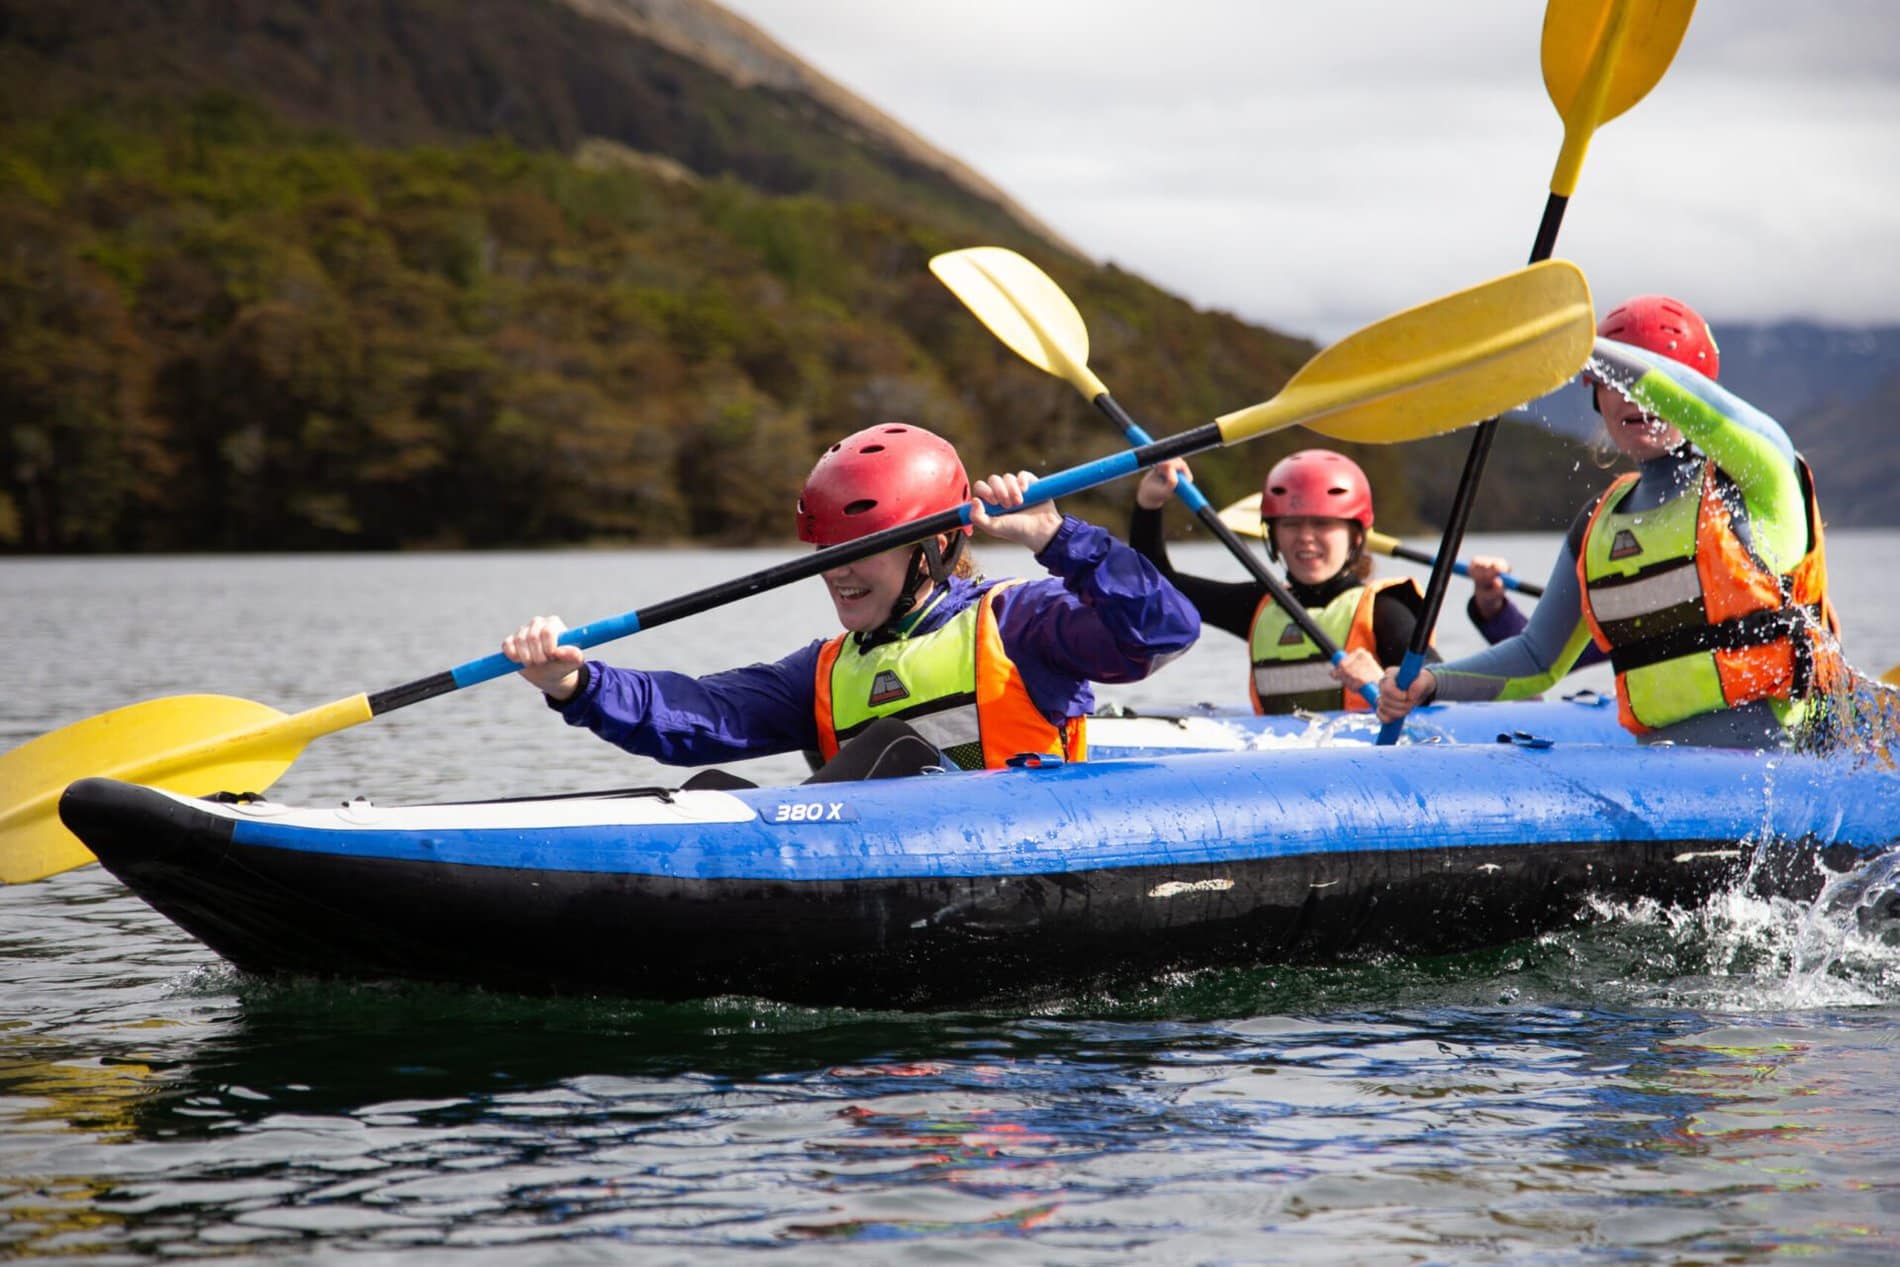 strive, adventure southland, young women, young women in the outdoors, things to do for young women, things to do for girls. girls in the outdoors, kayaking, climbing, abseiling, fun things to do, build confidence, build skills, skill building, building relationships, adventure activities